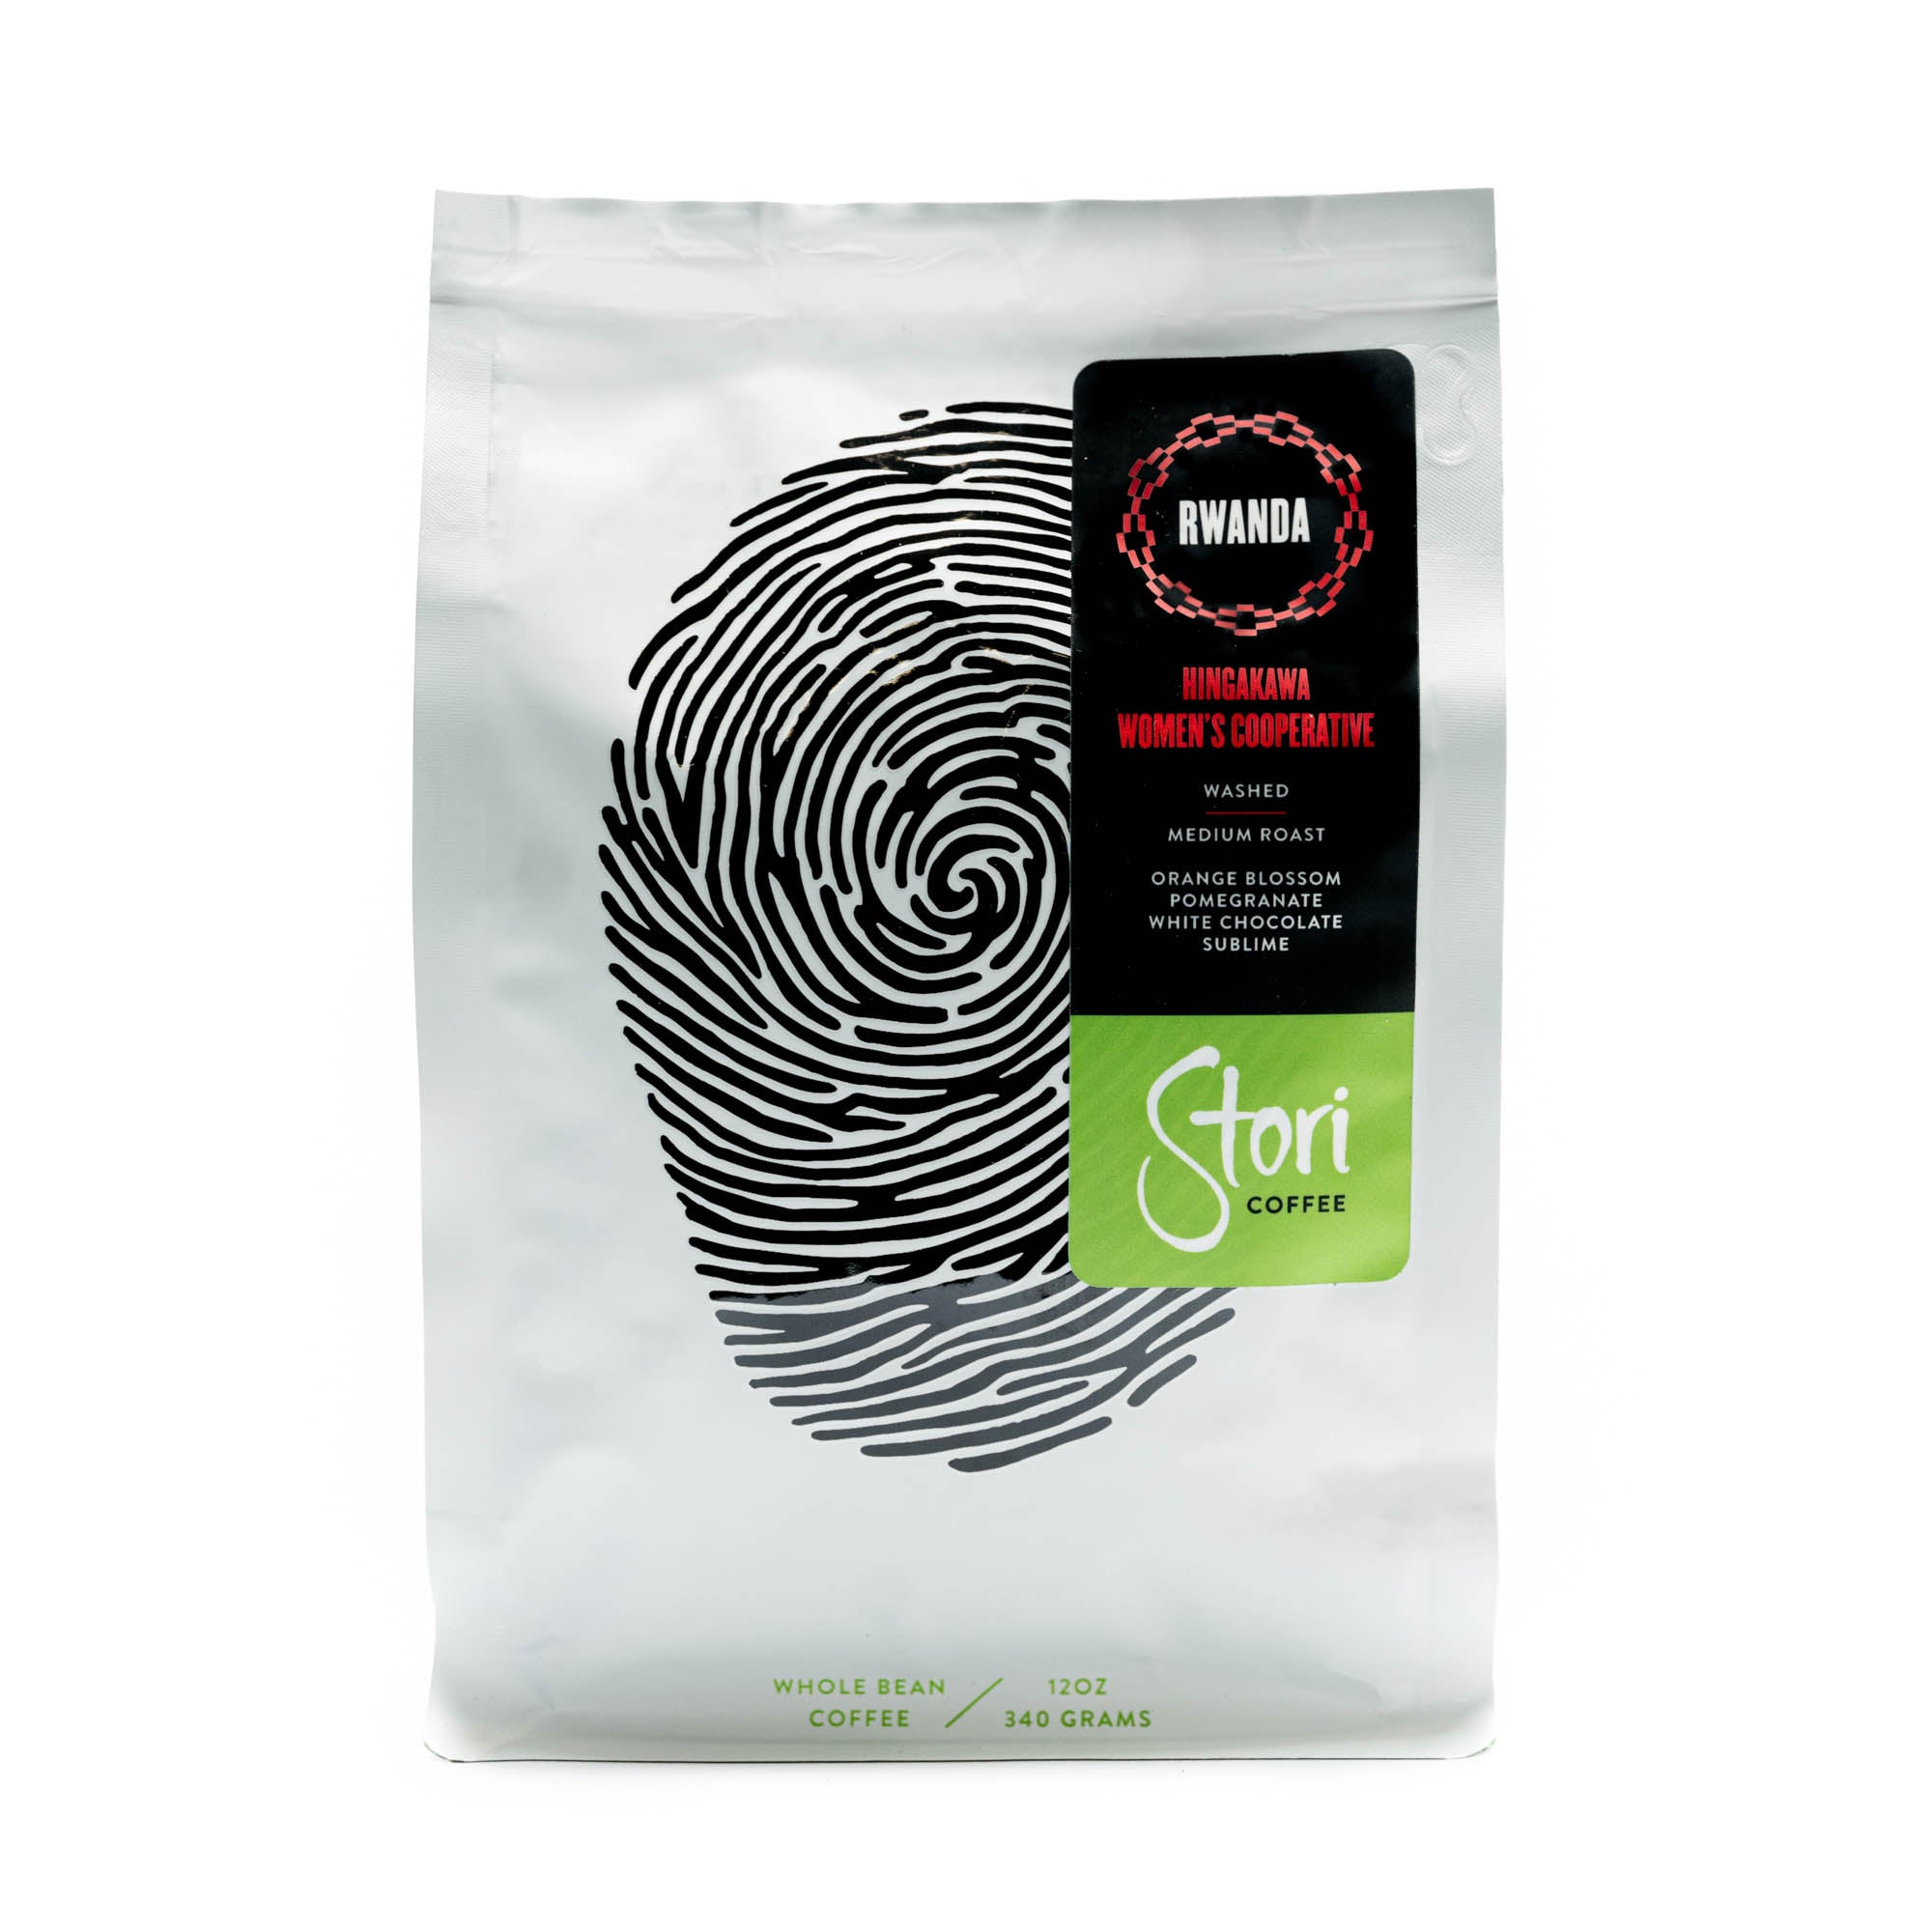 This picture shows an image of the front of our Single Origin Rwanda Coffee Bag. The bag is white with a black thumb print to symbolize our global connection. 